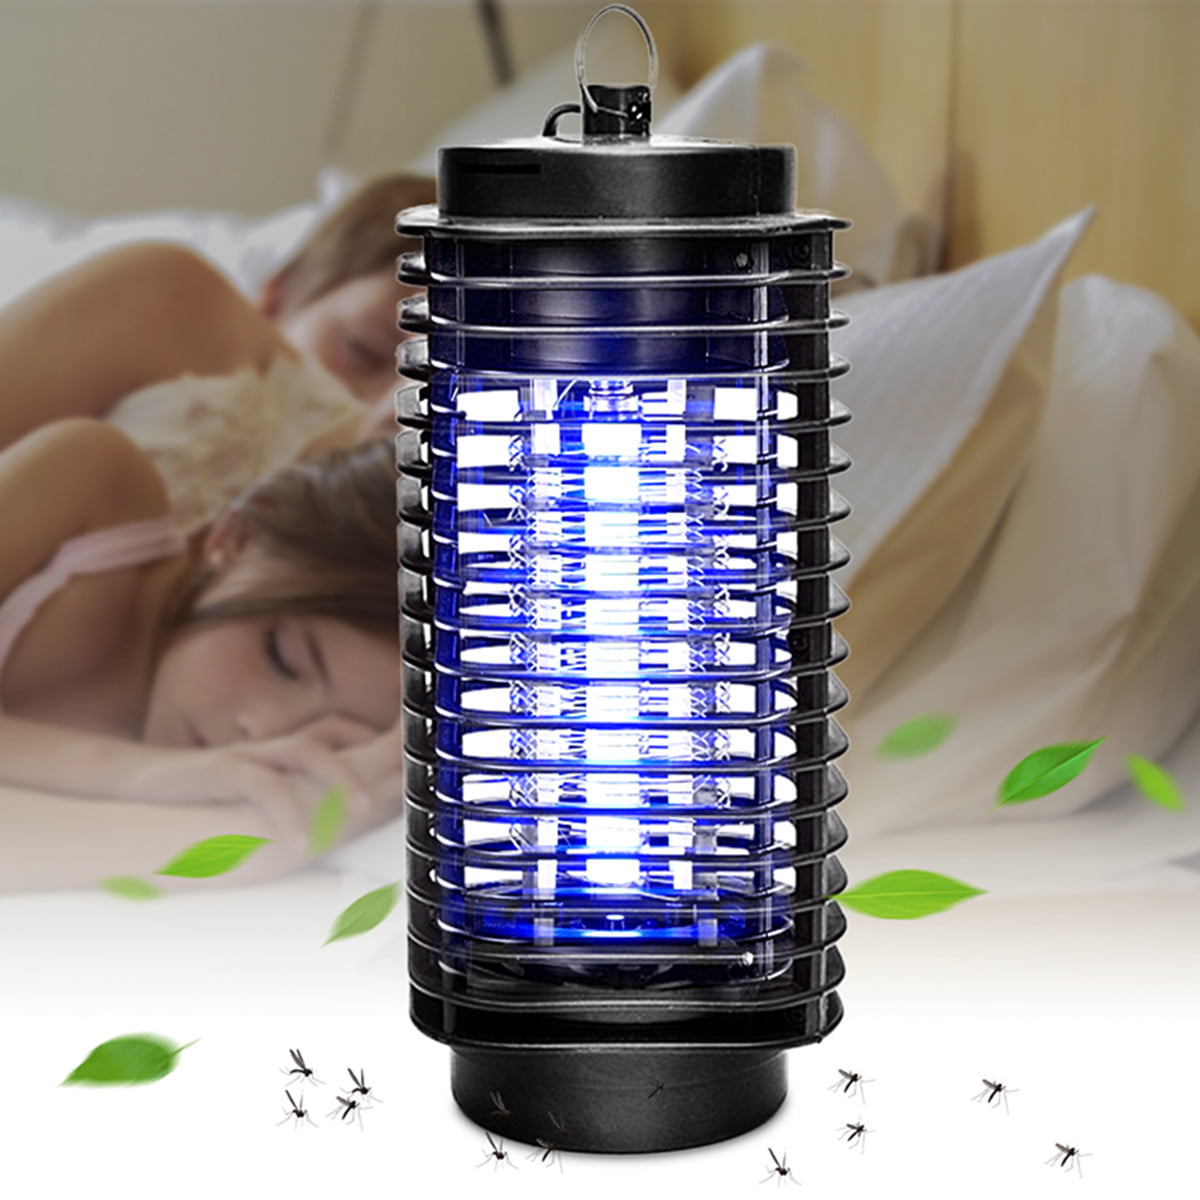 ELECTRONIC UV LIGHT MOSQUITO INSECT KILLER TRAP LAMP PEST FLY BUG ZAPPER INDOOR 